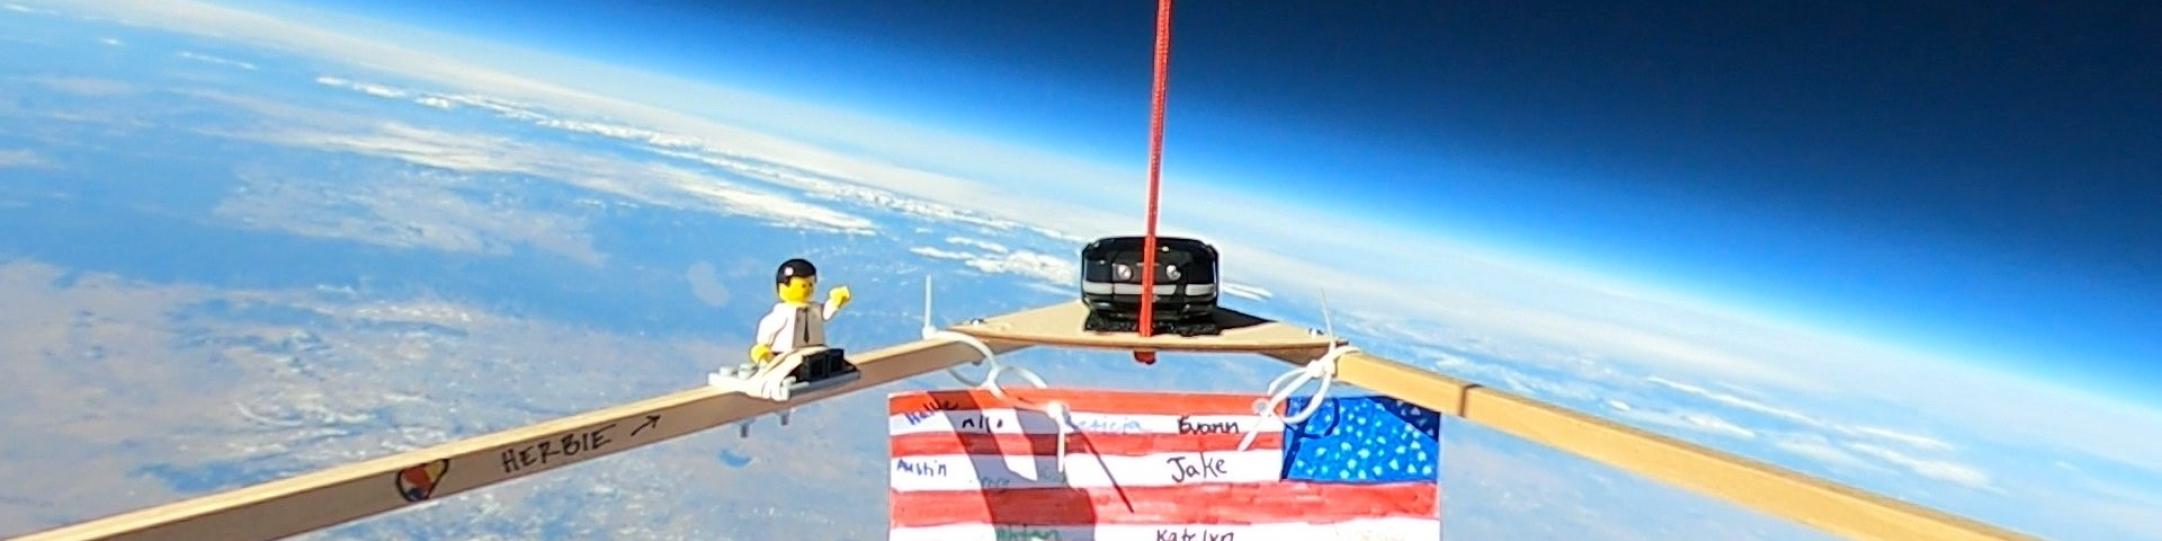 Our weather balloon reached 102,000 feet high!